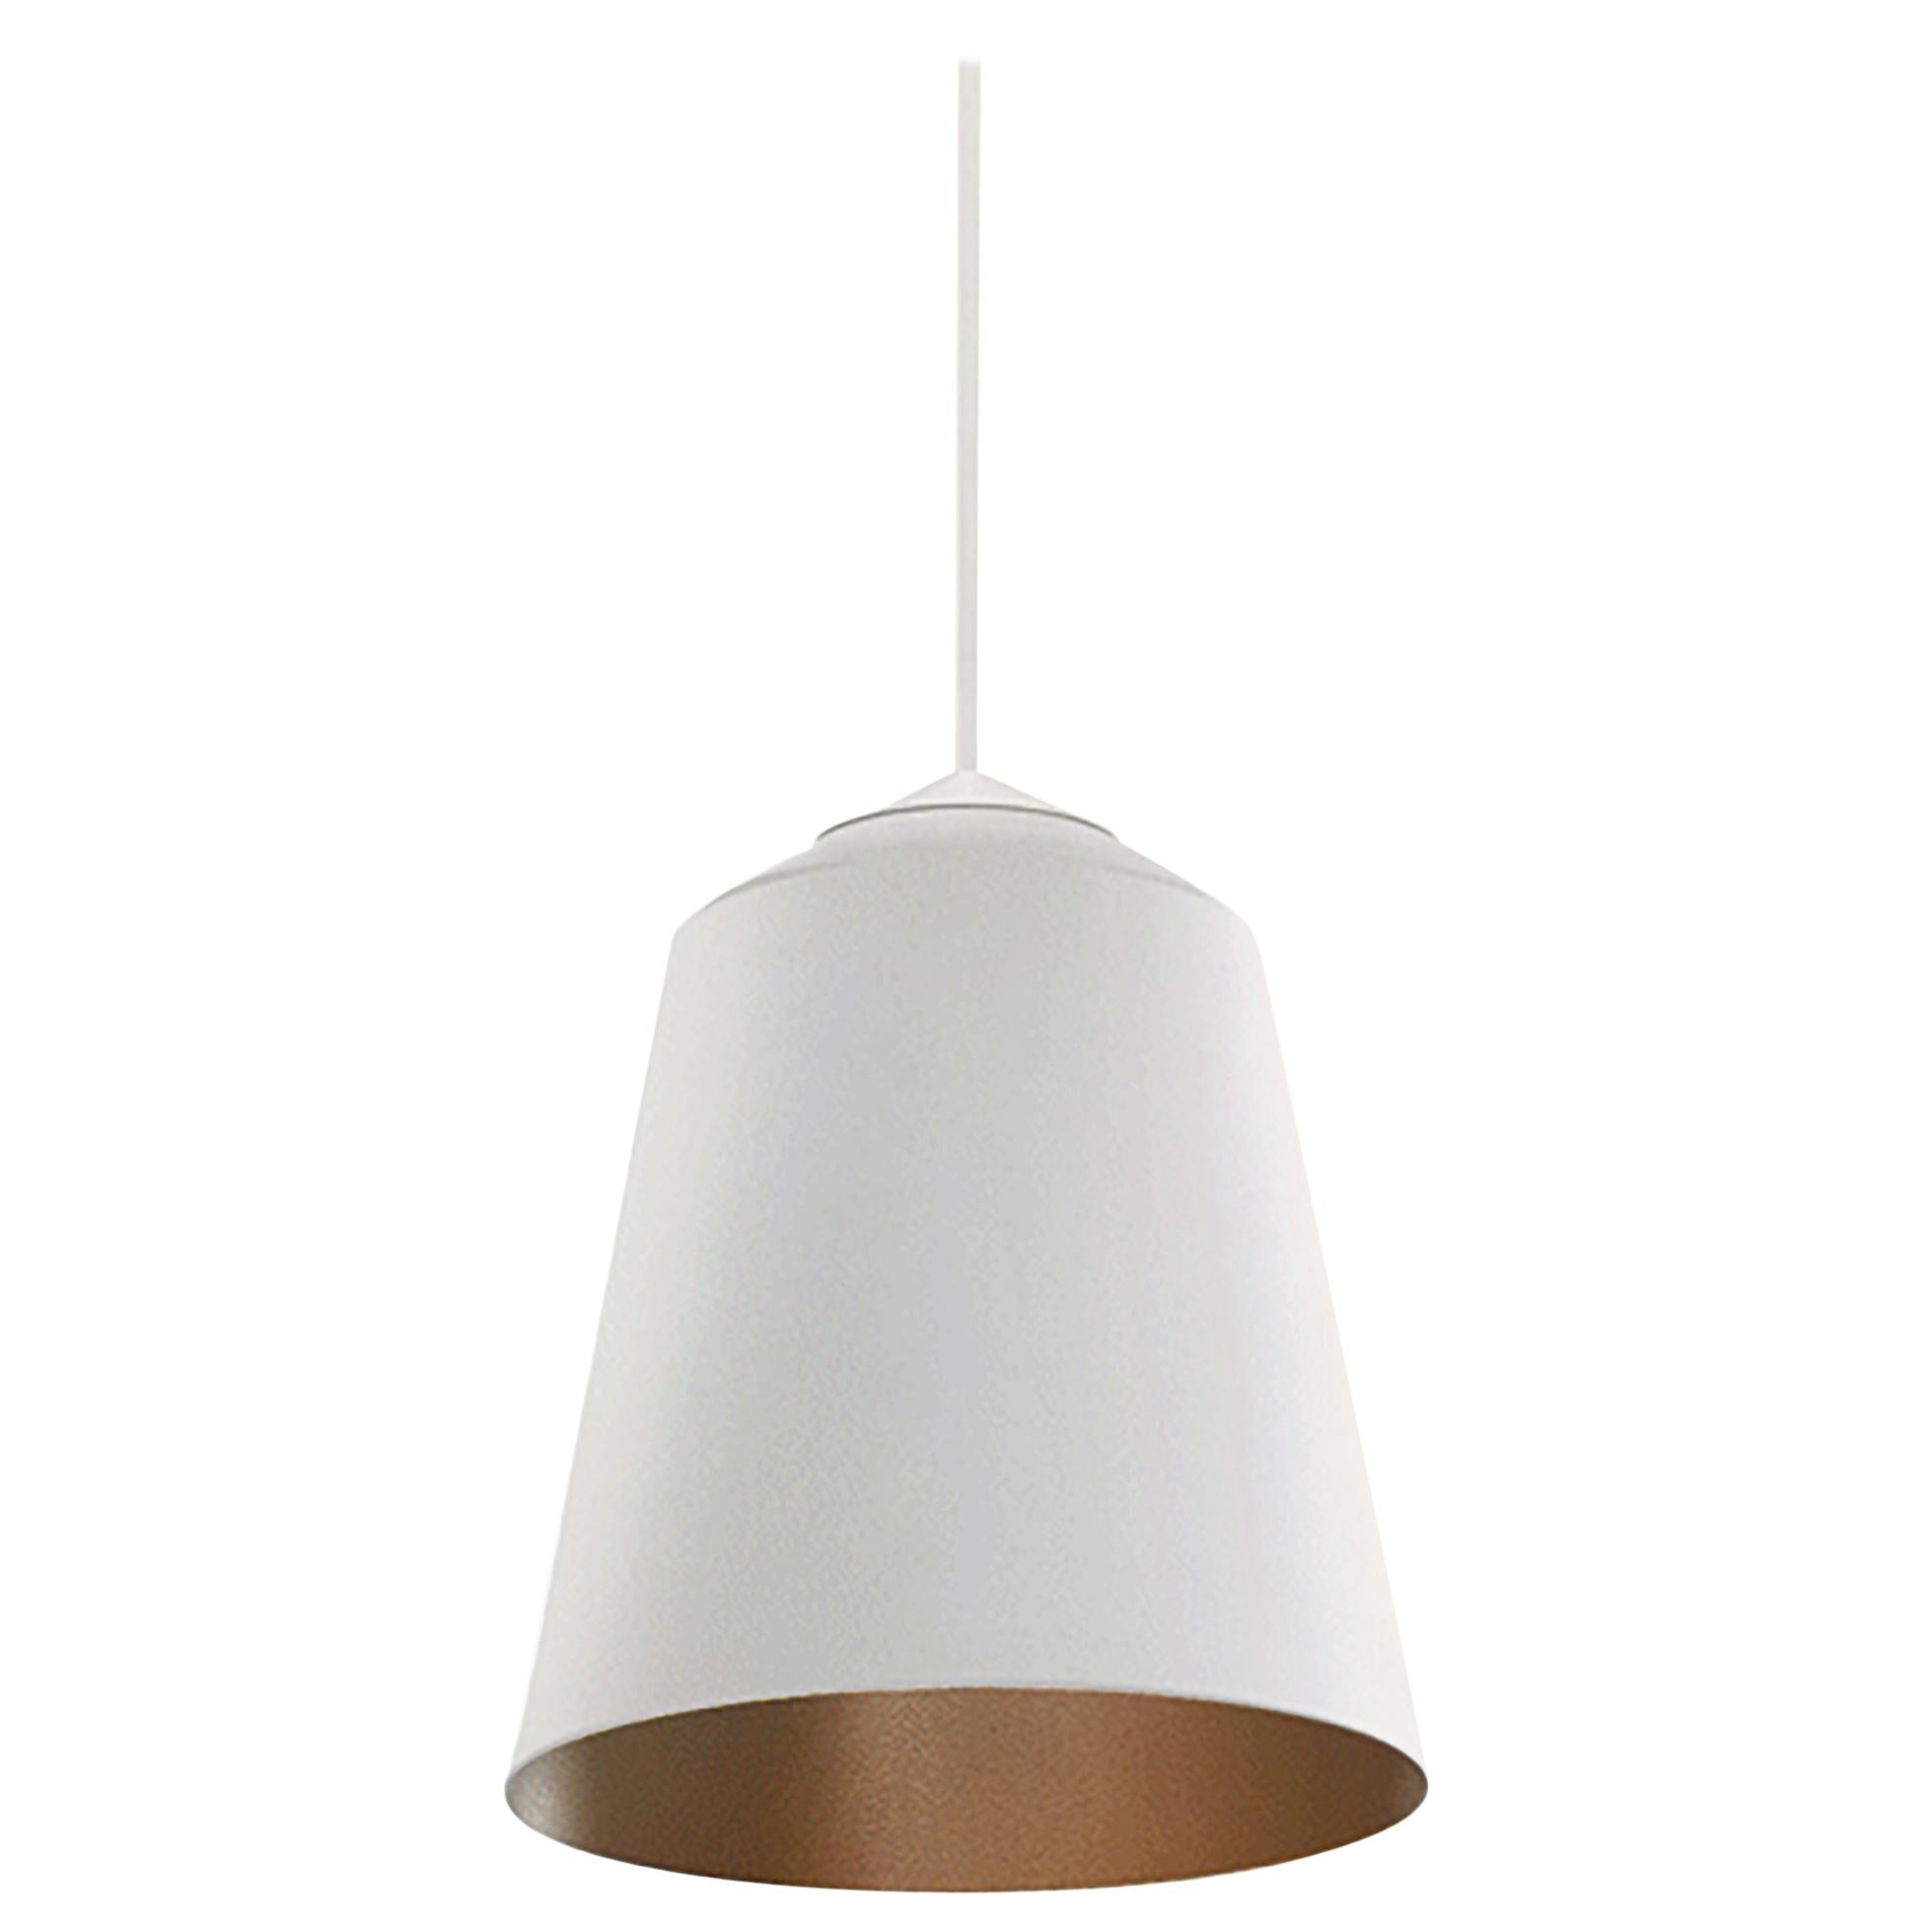 Circus Pendant Light Design By Corinna Warm For Warm Small White/Bronze In Stock For Sale